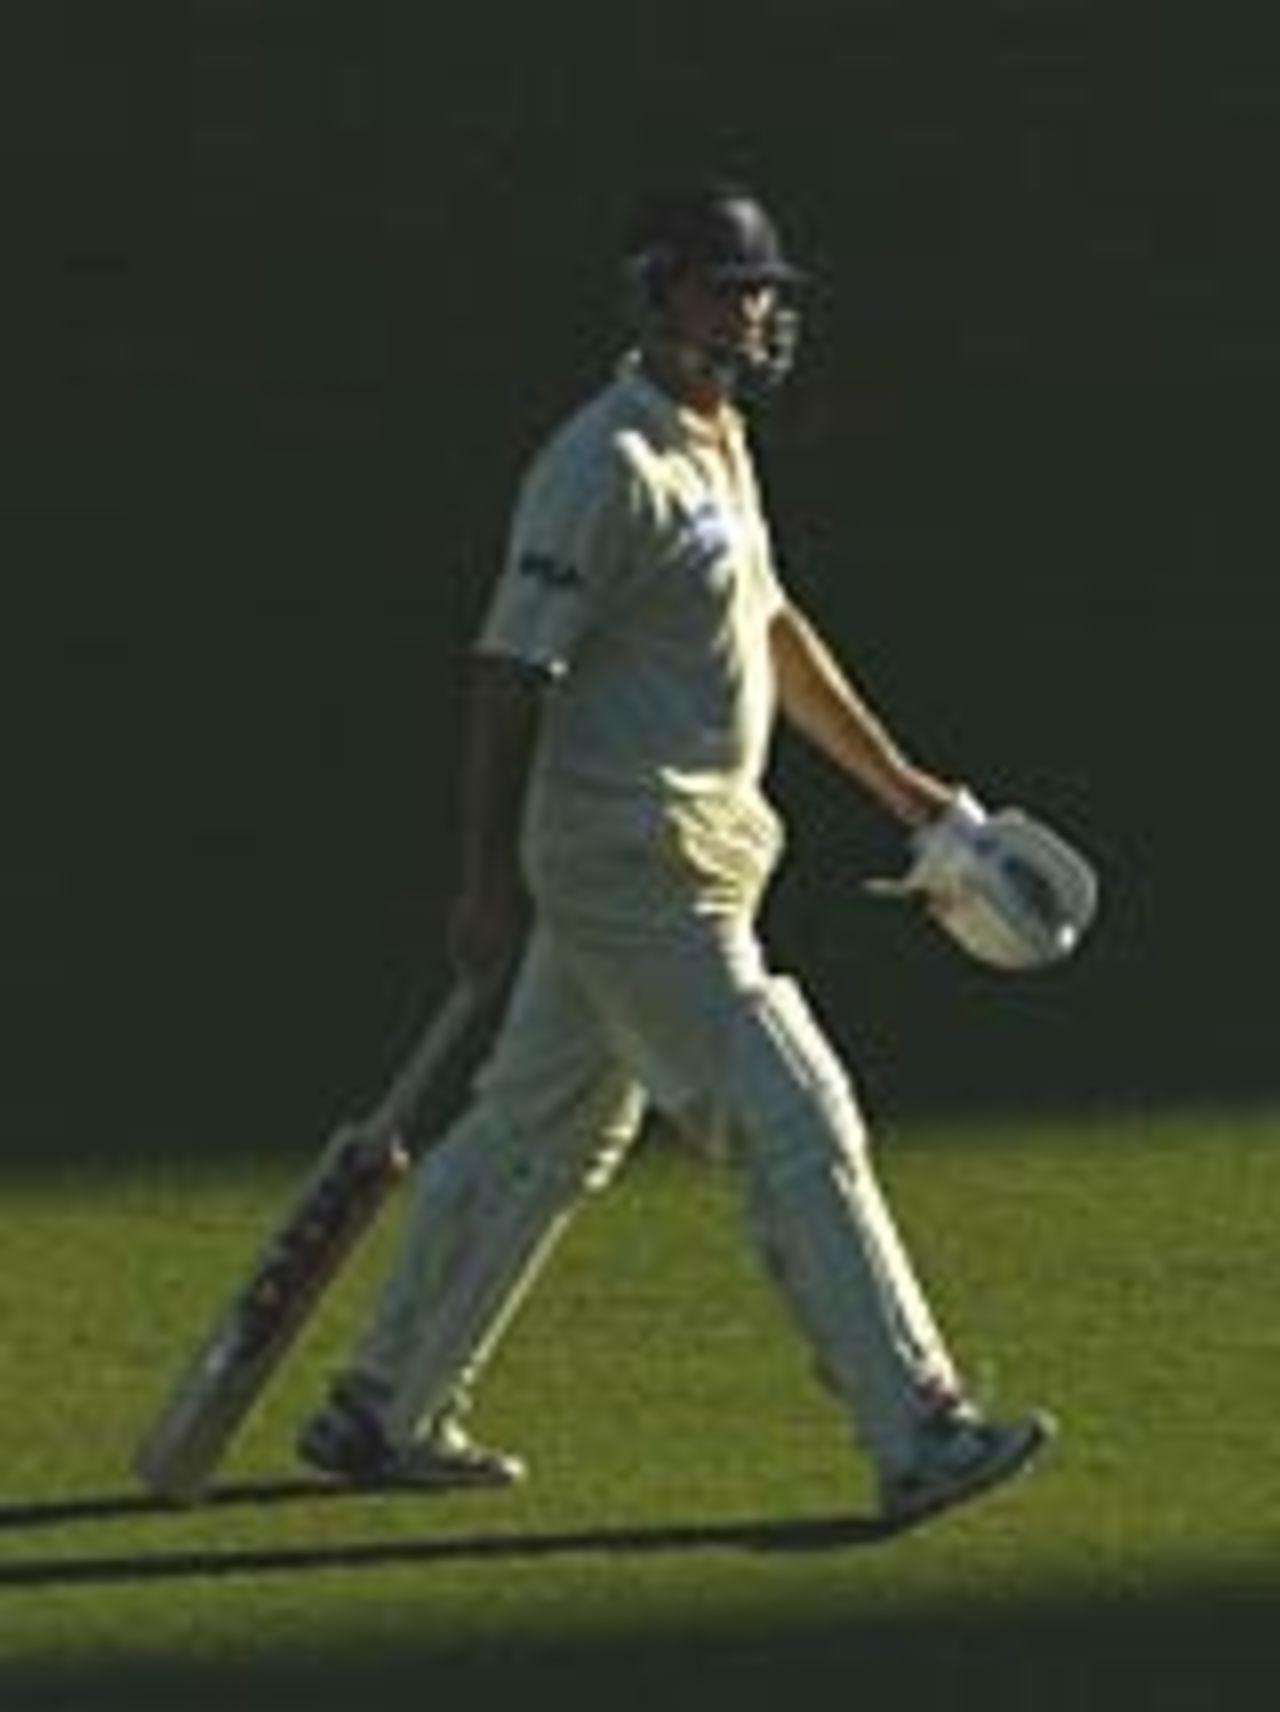 Steve Waugh leaves the field, New South Wales v Queensland, SCG, March 5, 2004